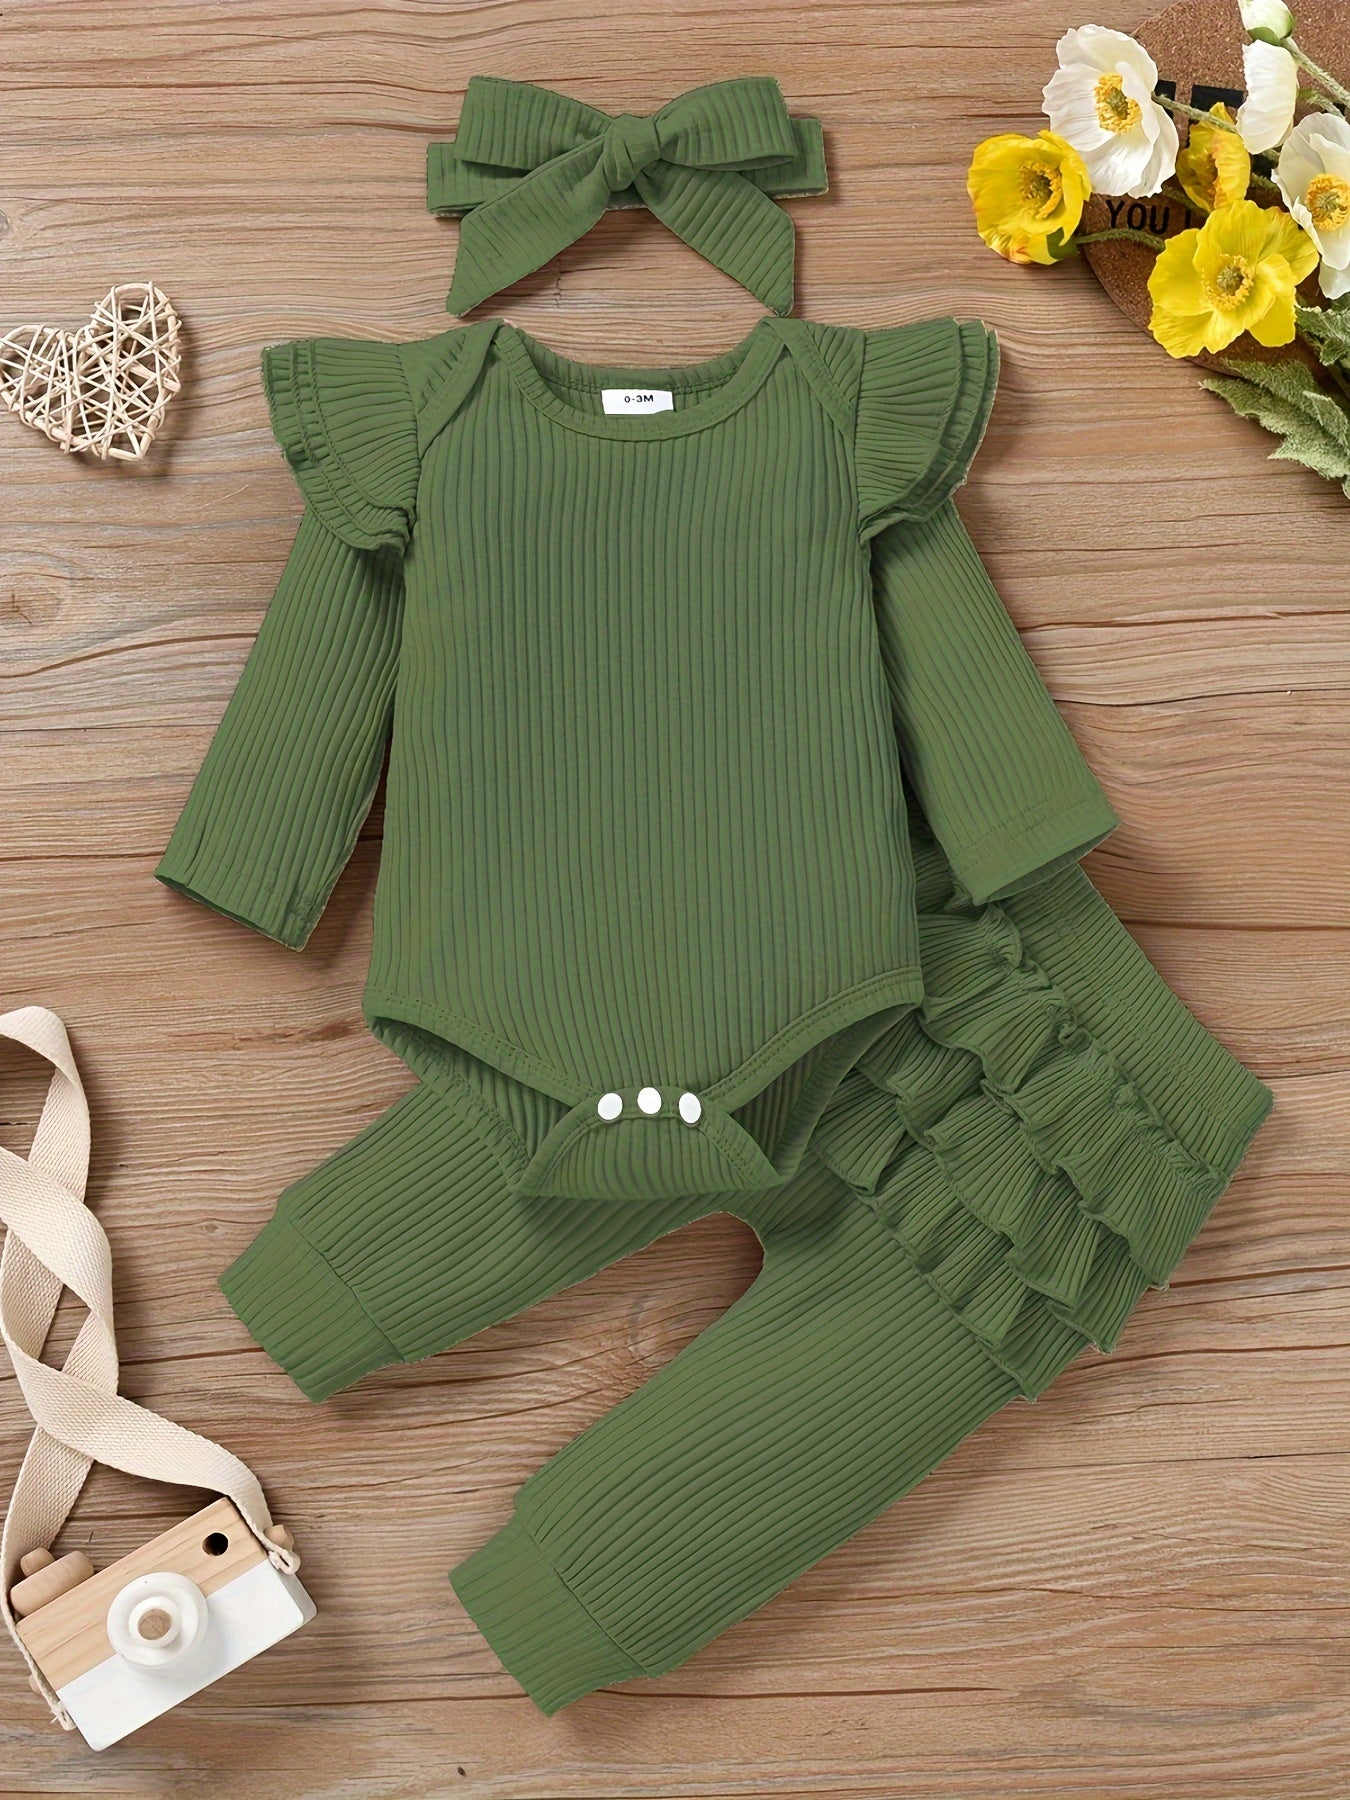 Baby Girl Clothes Newborn Romper Long Sleeve Infant Outfits 3Pcs Ruffle Tops + Pants + Headband 0-18 Months